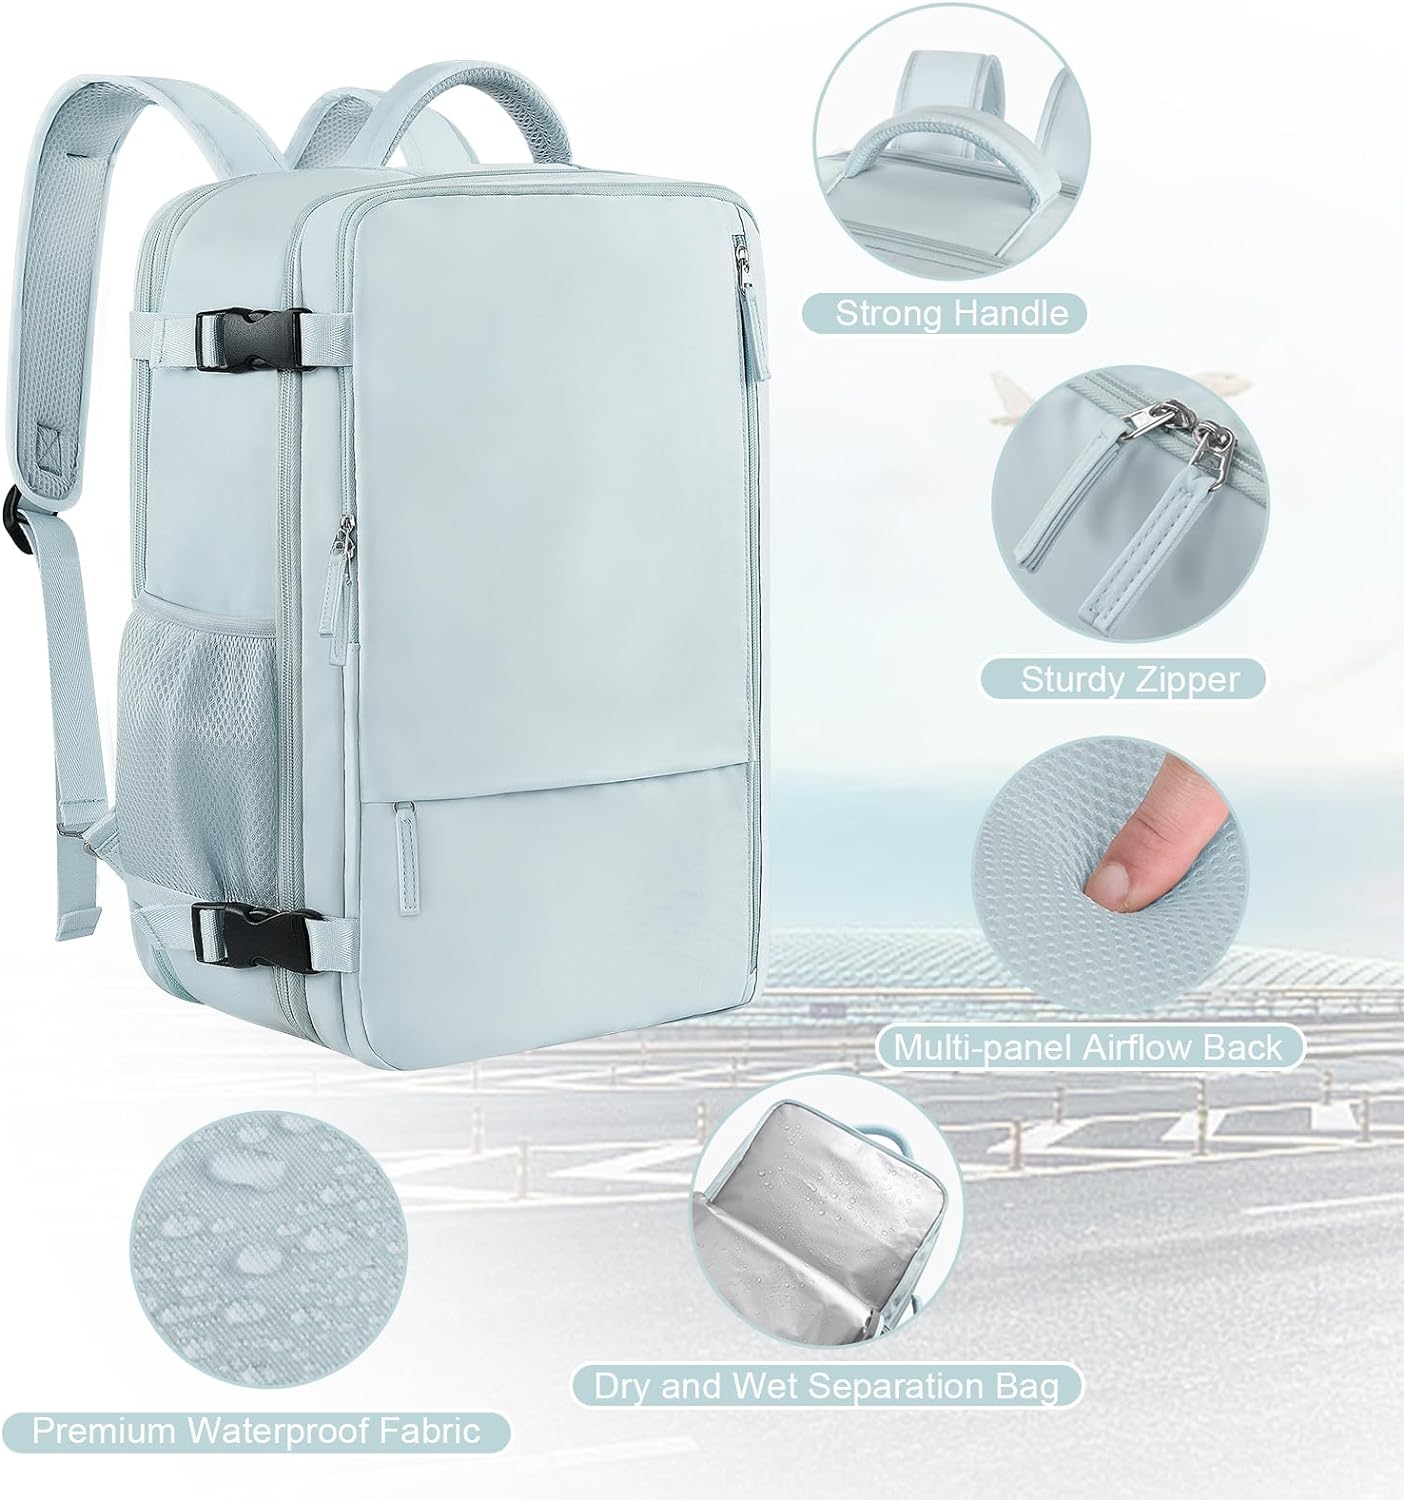 Women's Travel Backpacks pack in one day